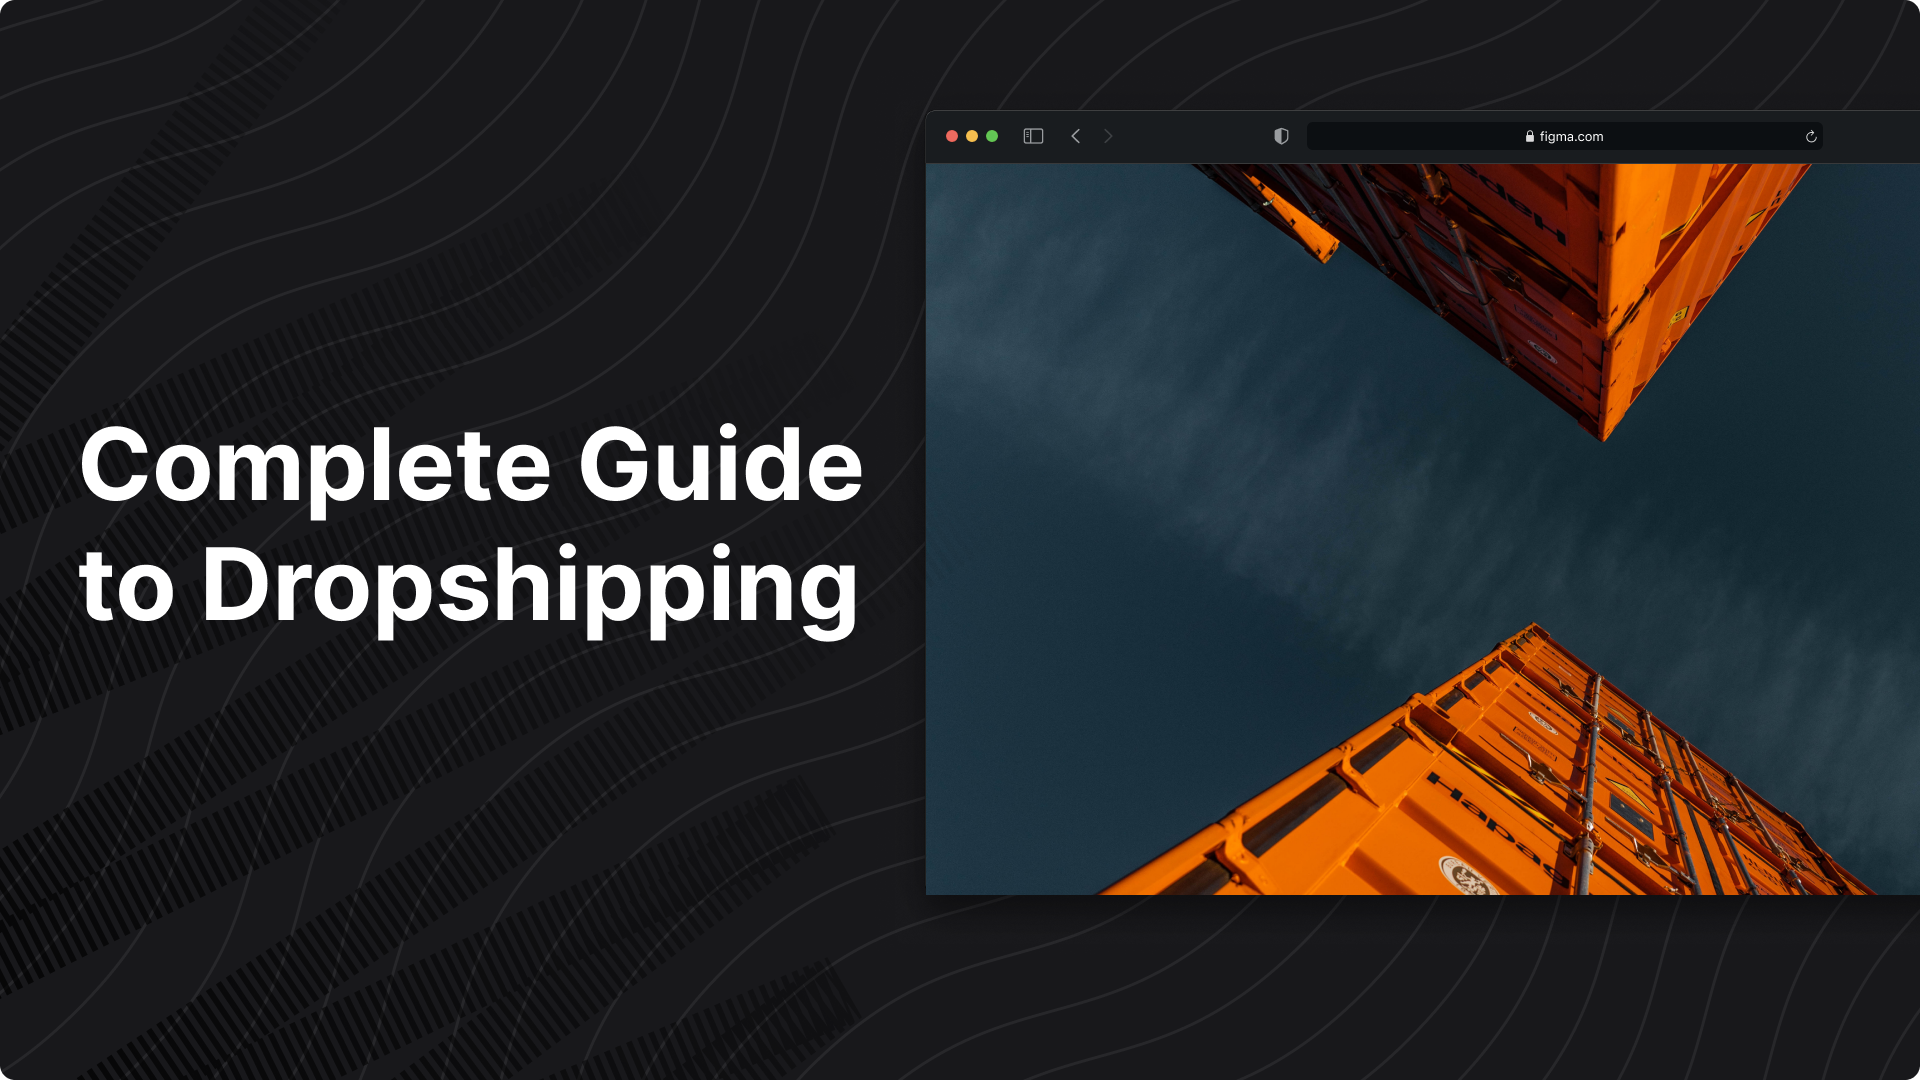 The Complete Guide to Dropshipping: An Essential E-commerce Strategy